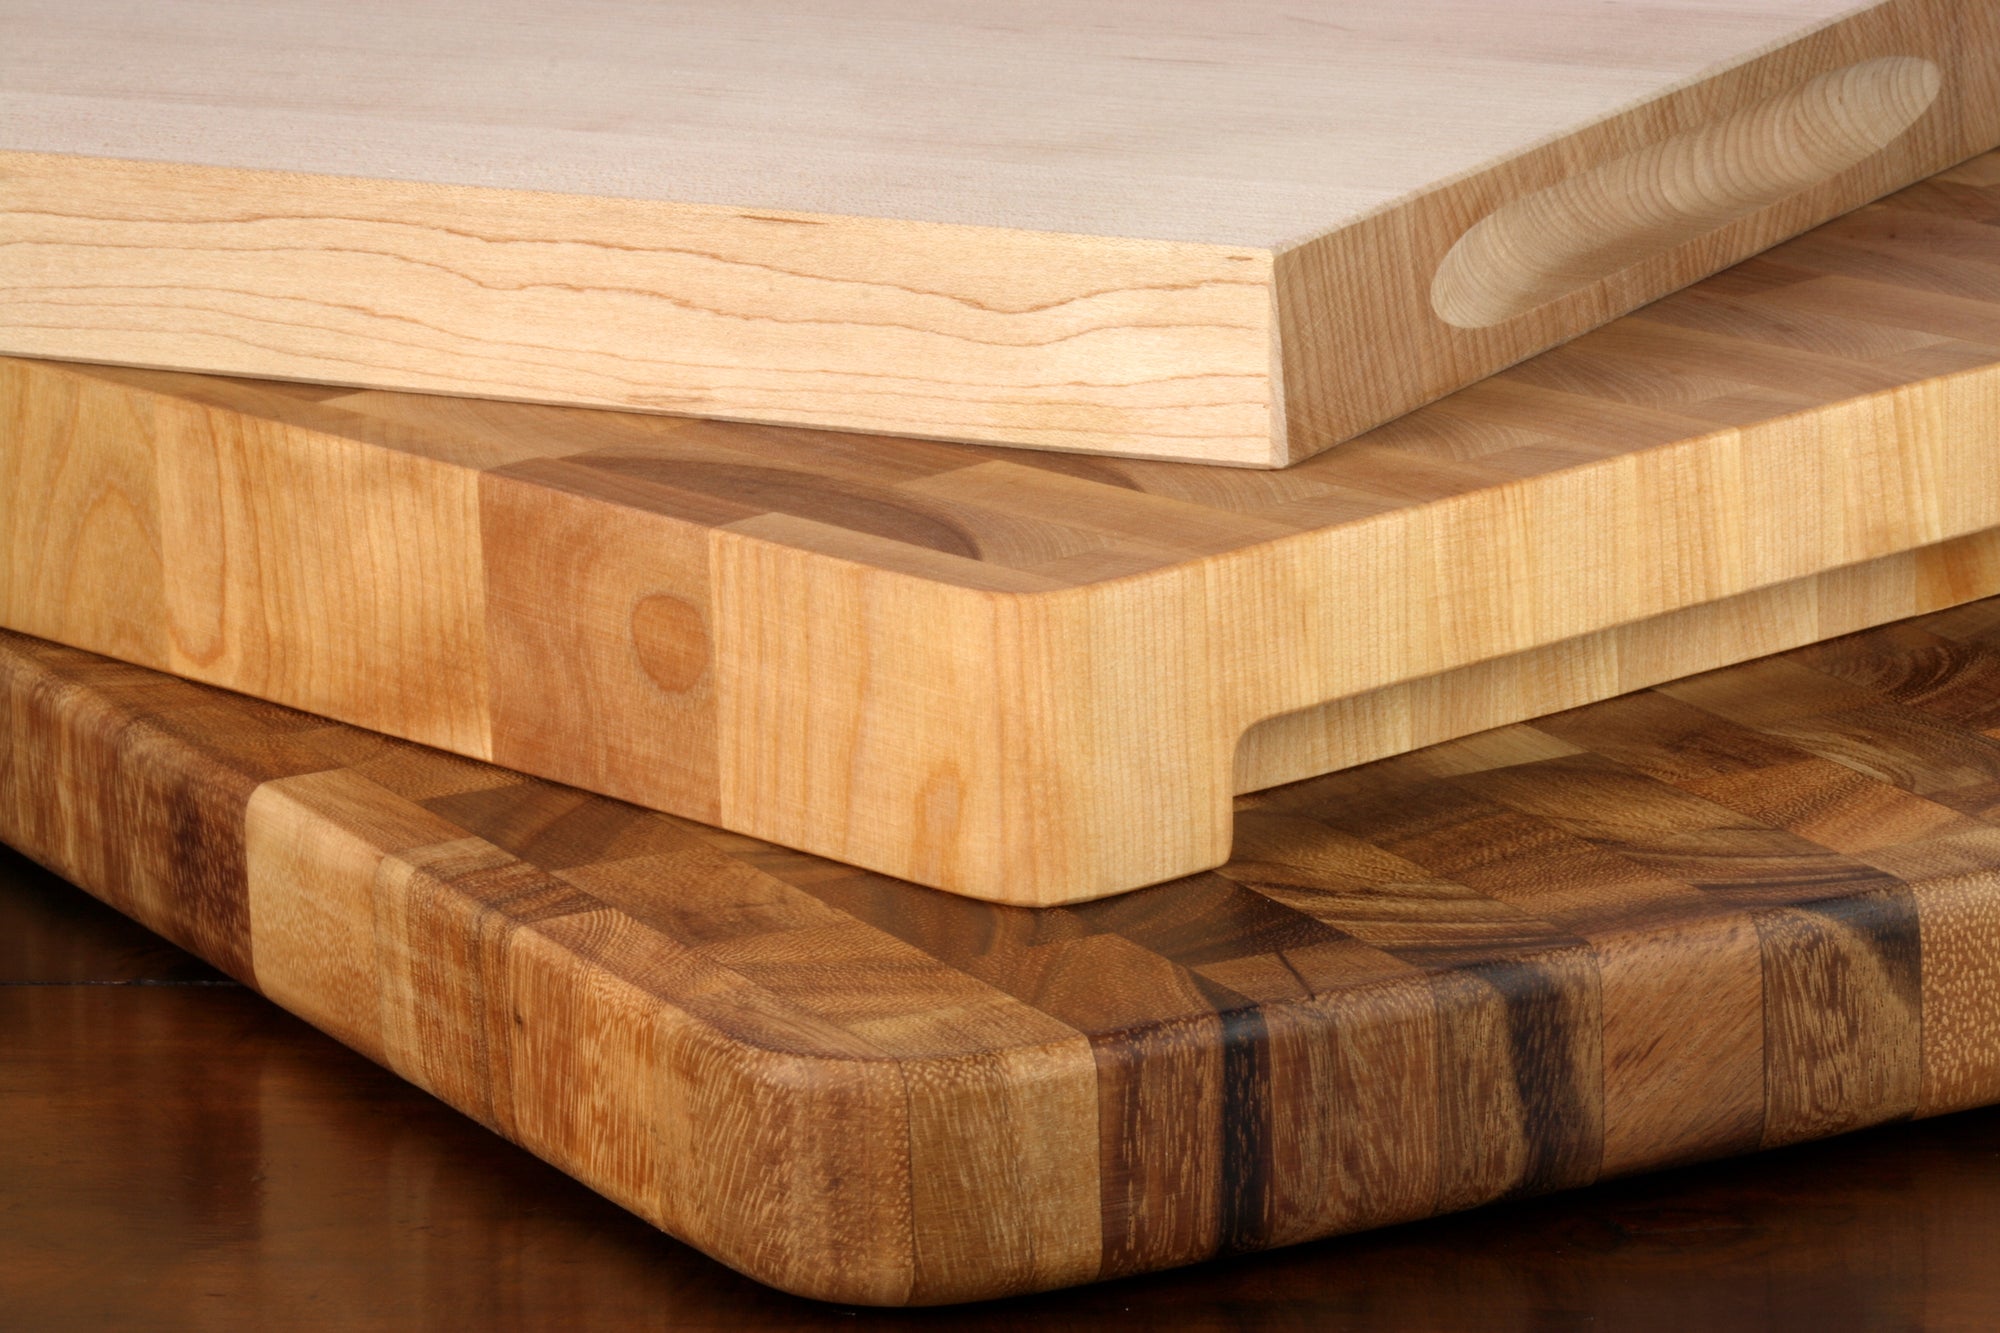 What is the Best Gift to Give Someone Who Loves Charcuterie Boards?